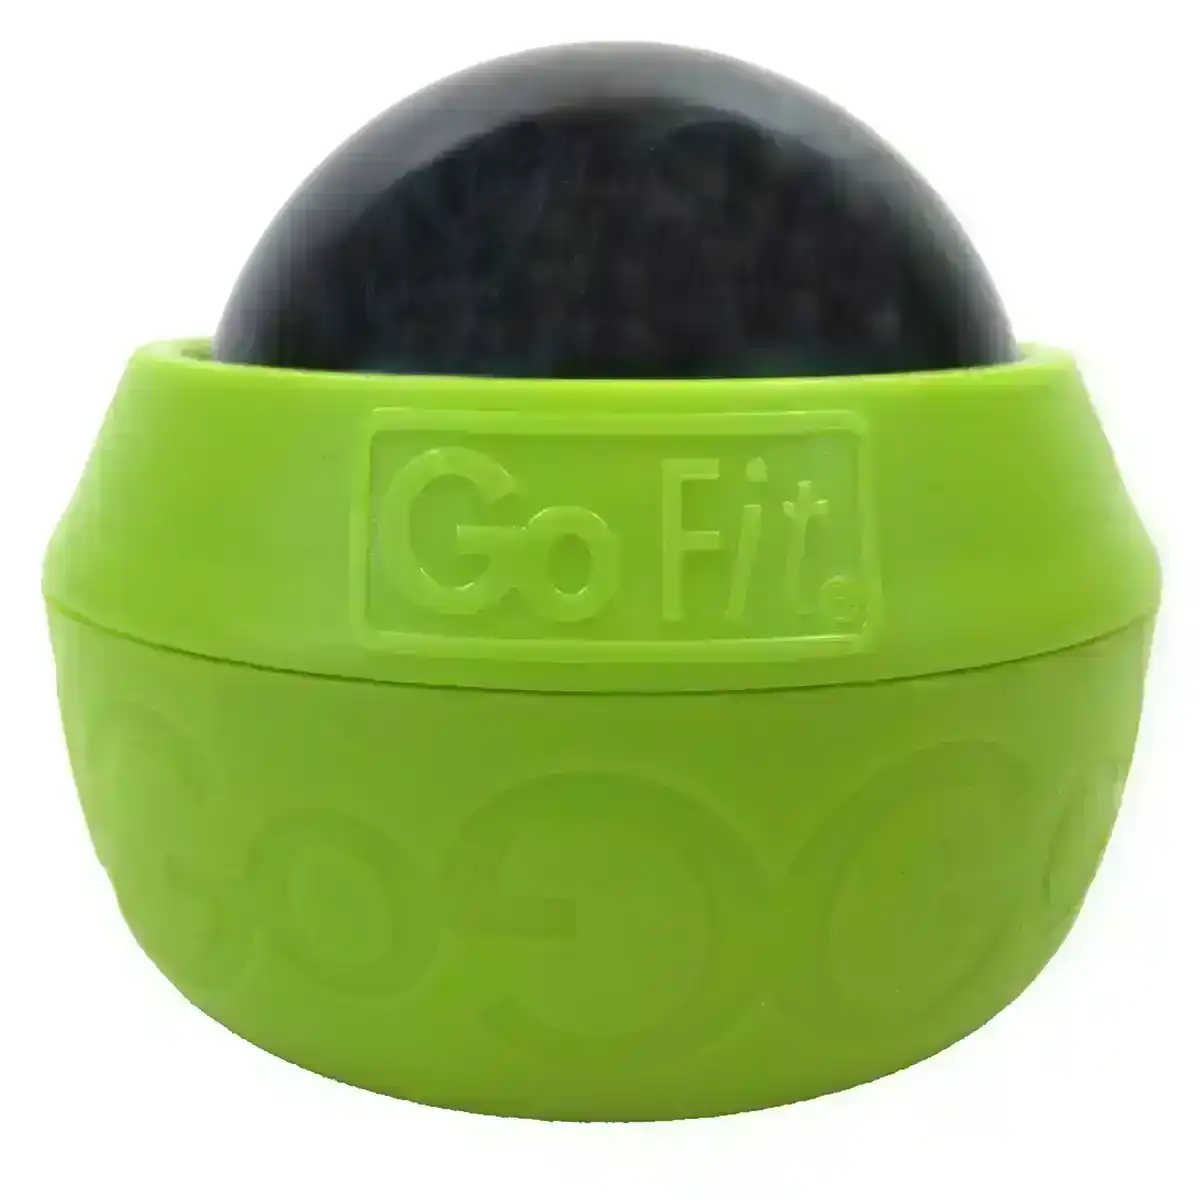 Gofit 8cm Roll-On Portable Rolling Sports/Fitness Body/Muscle Recovery Massager